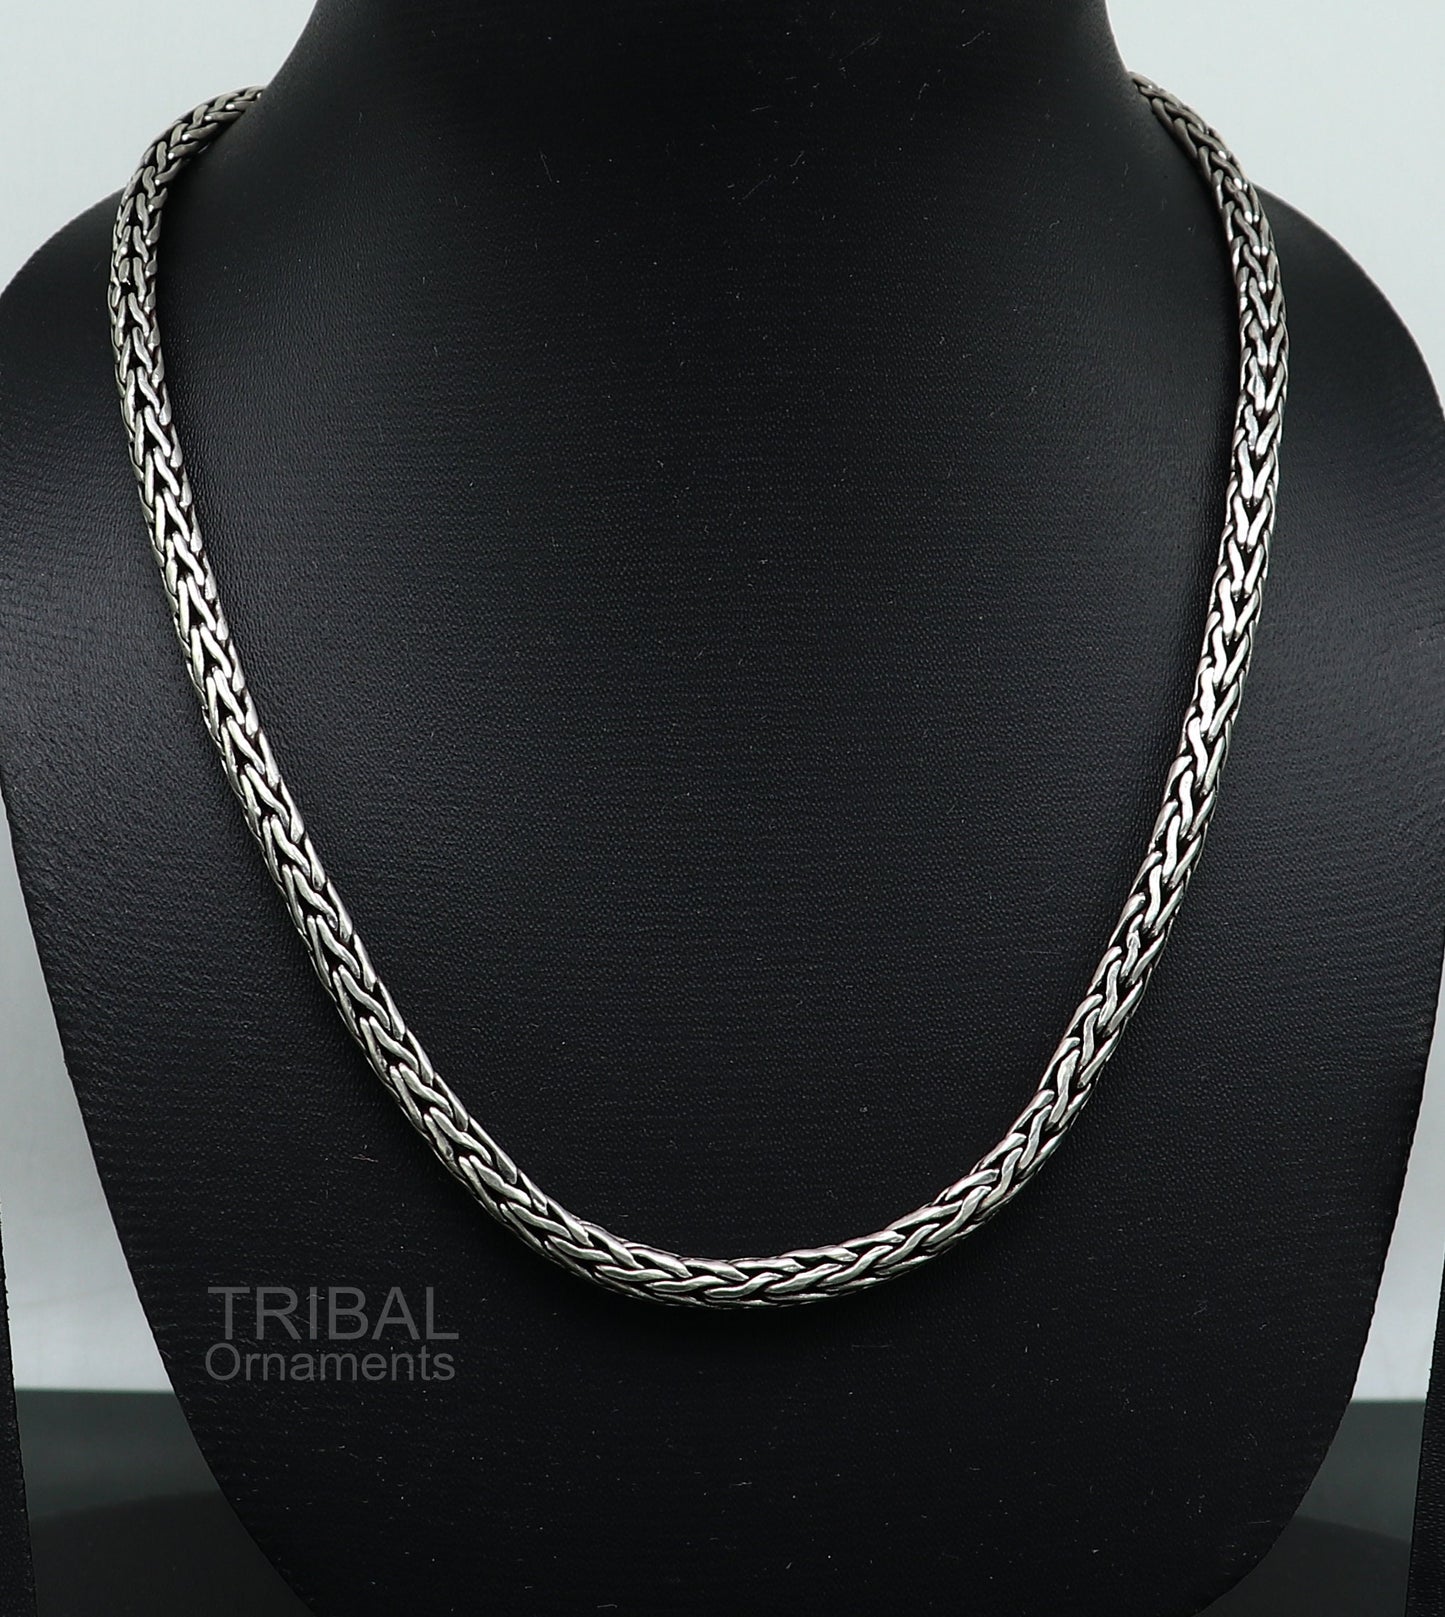 925 sterling silver solid half round D shape wheat chain 19 inches long necklace, excellent oxidized gifting heavy ethnic jewelry ch120 - TRIBAL ORNAMENTS